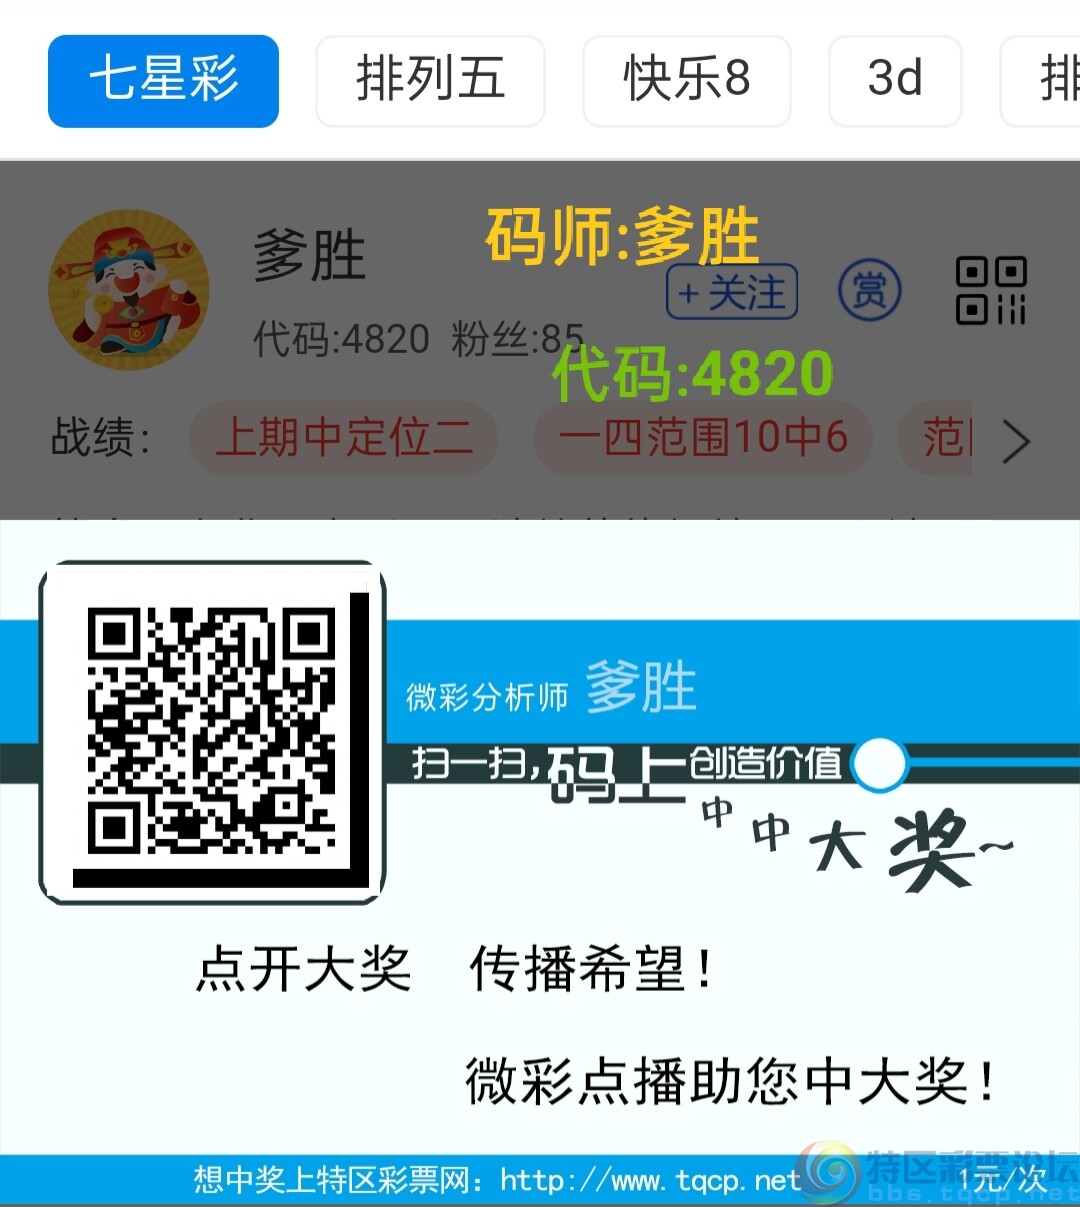 wechat_upload1698314107653a377bbb3f6